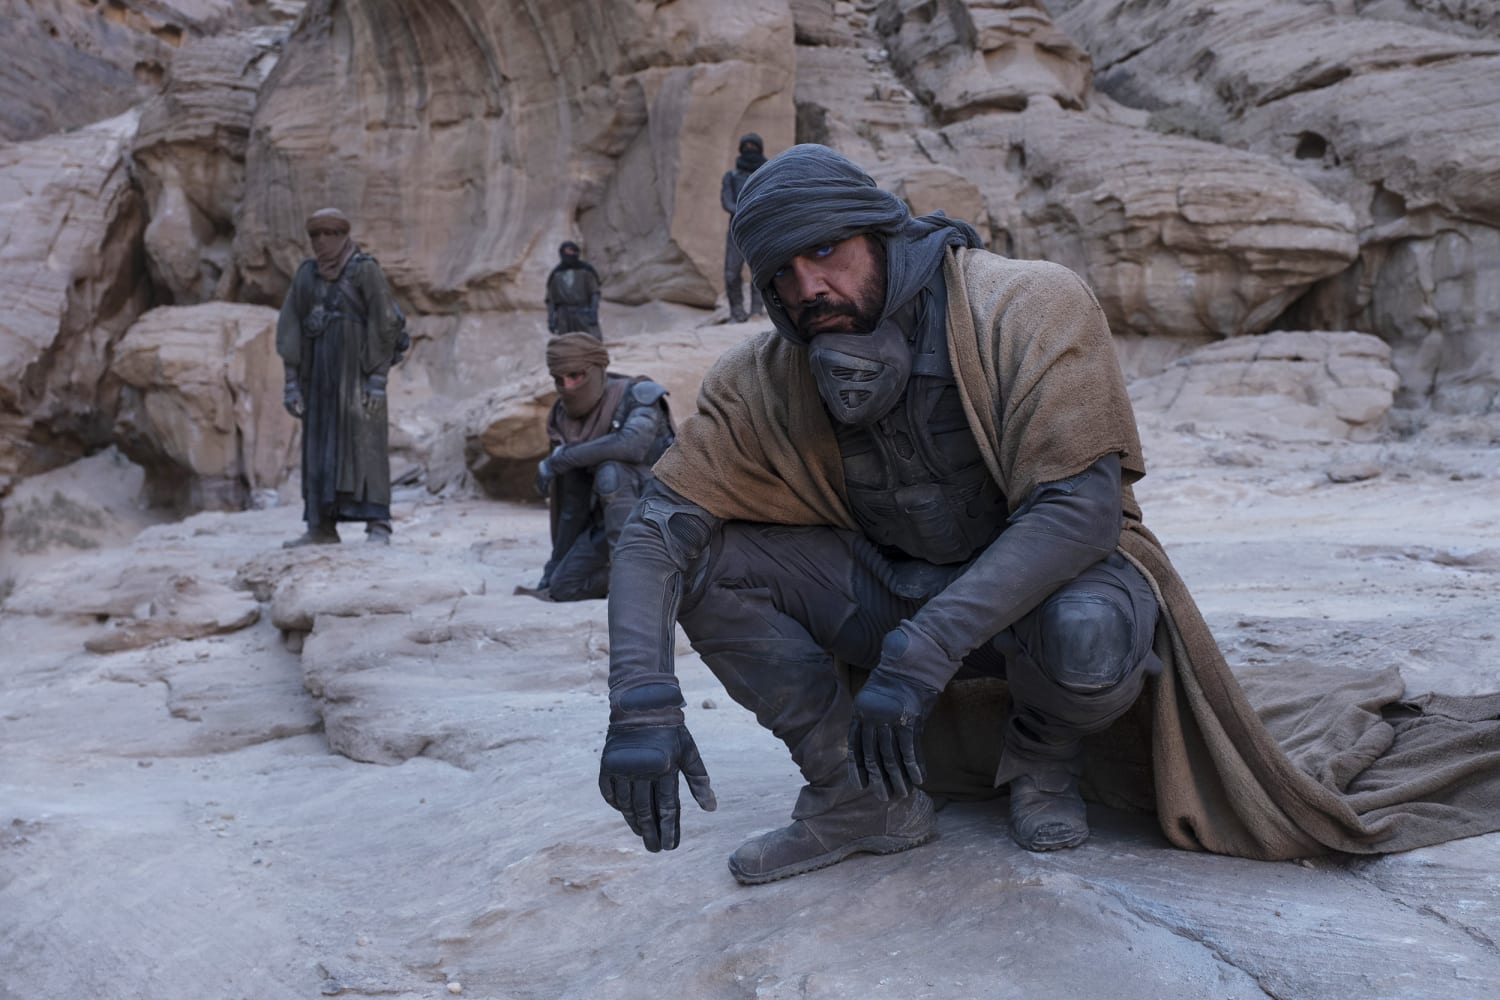 ‘Dune’ appropriates Islamic, Middle Eastern tropes without real inclusion, critics say